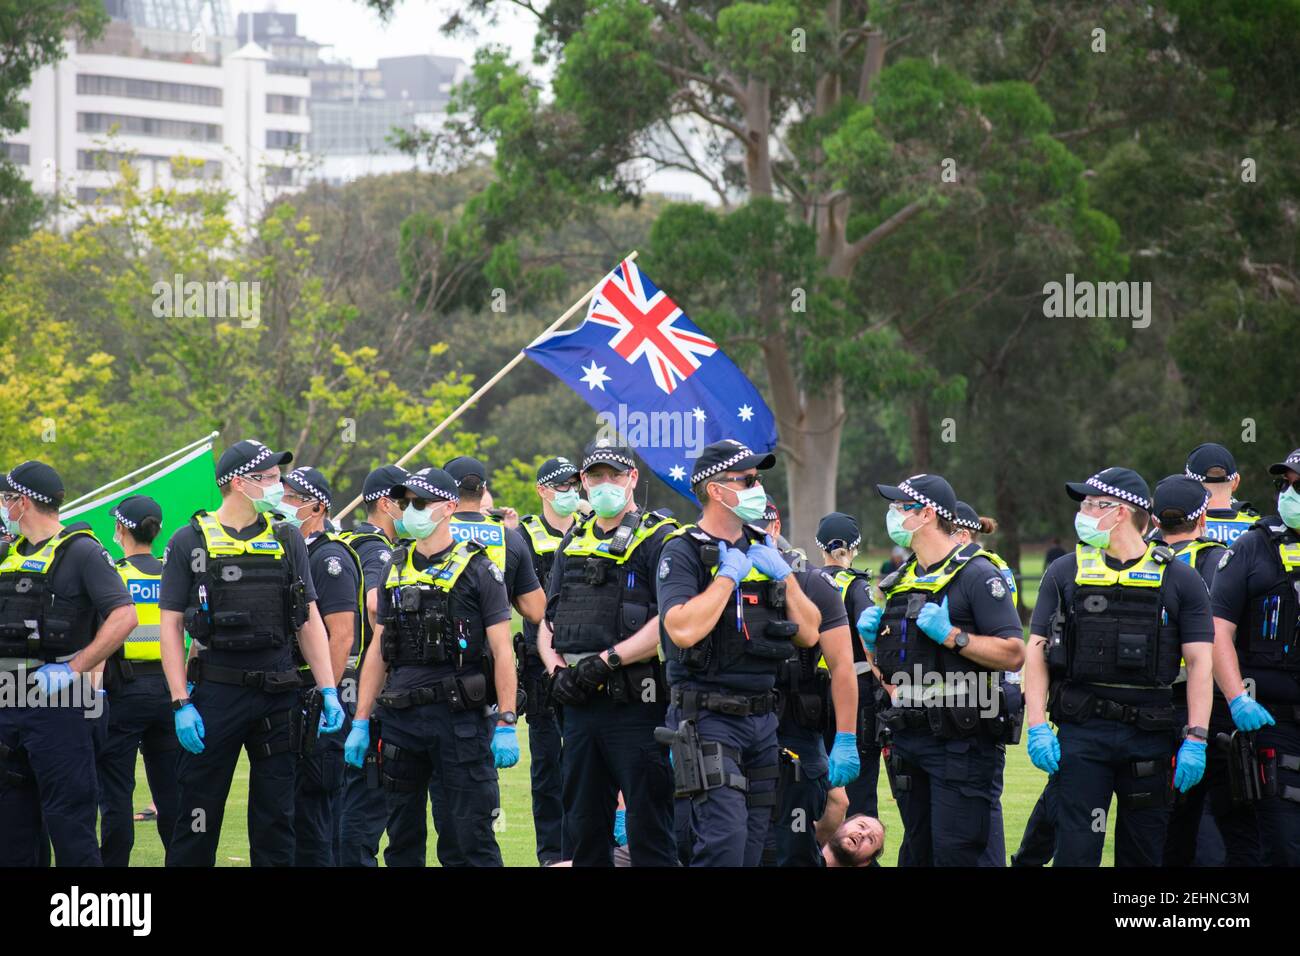 Melbourne, Australia. 20th Feb 2021. Police stand guard around a protester on the ground while the Australian flag flies over head at an anti COVID vaccination march in Fawkner Park. February 20, 2021. Melbourne, Australia. Credit: Jay Kogler/Alamy Live News Stock Photo